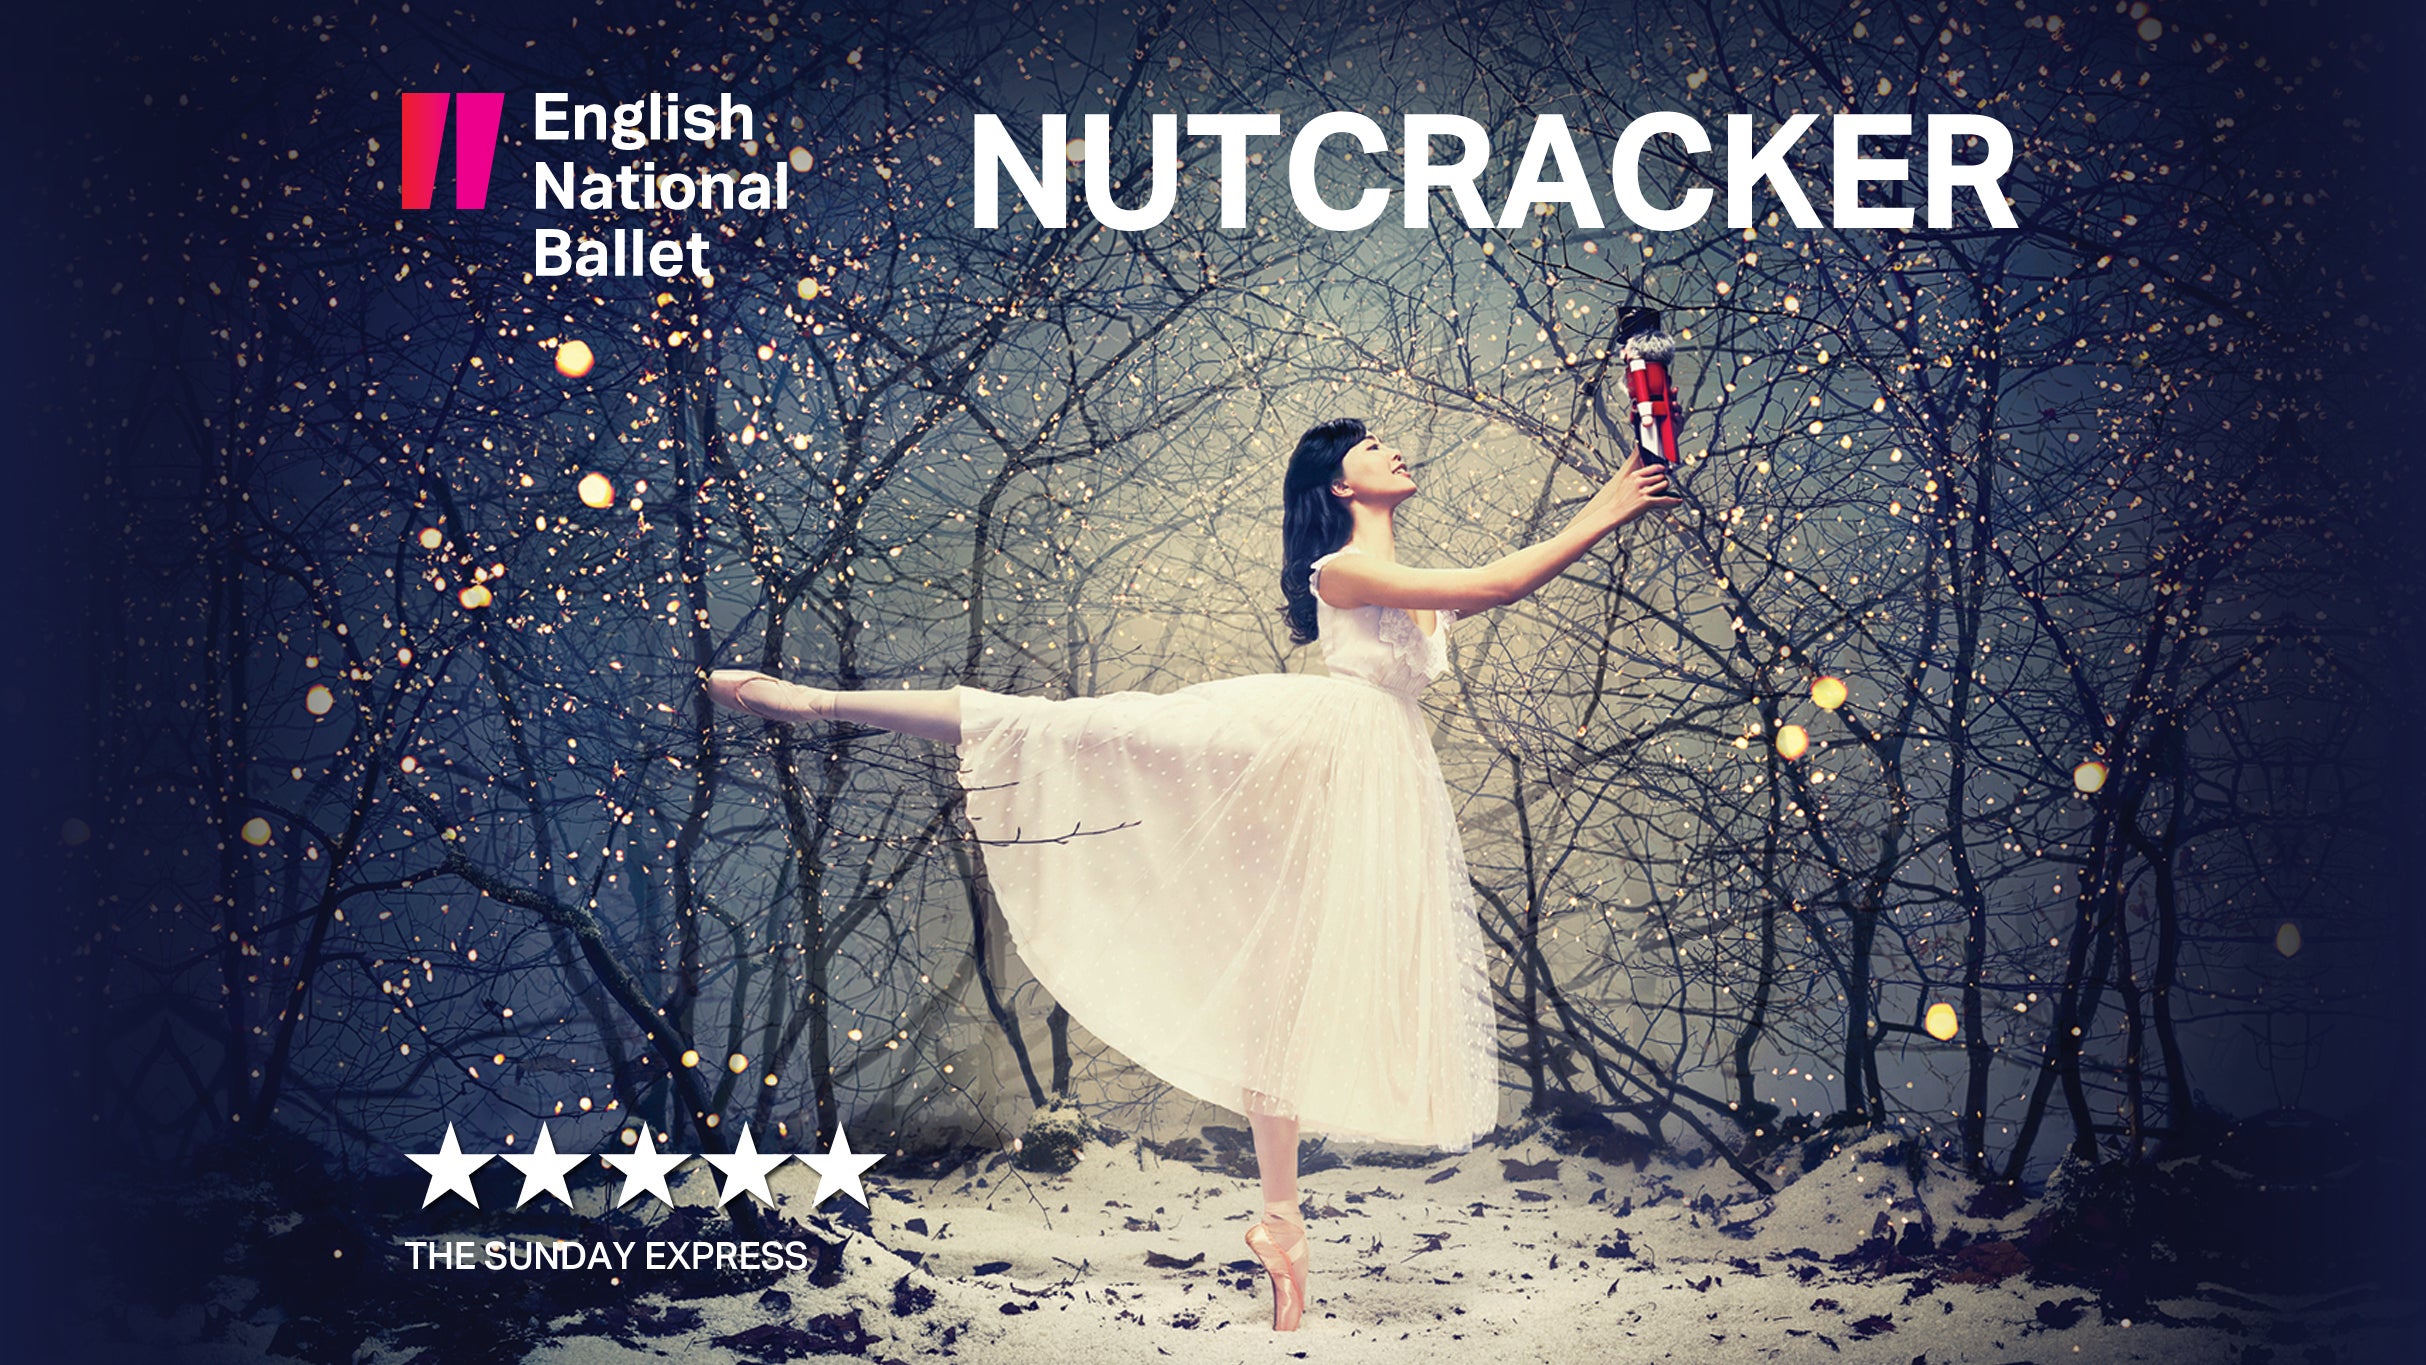 The Nutcracker - English National Ballet Event Title Pic